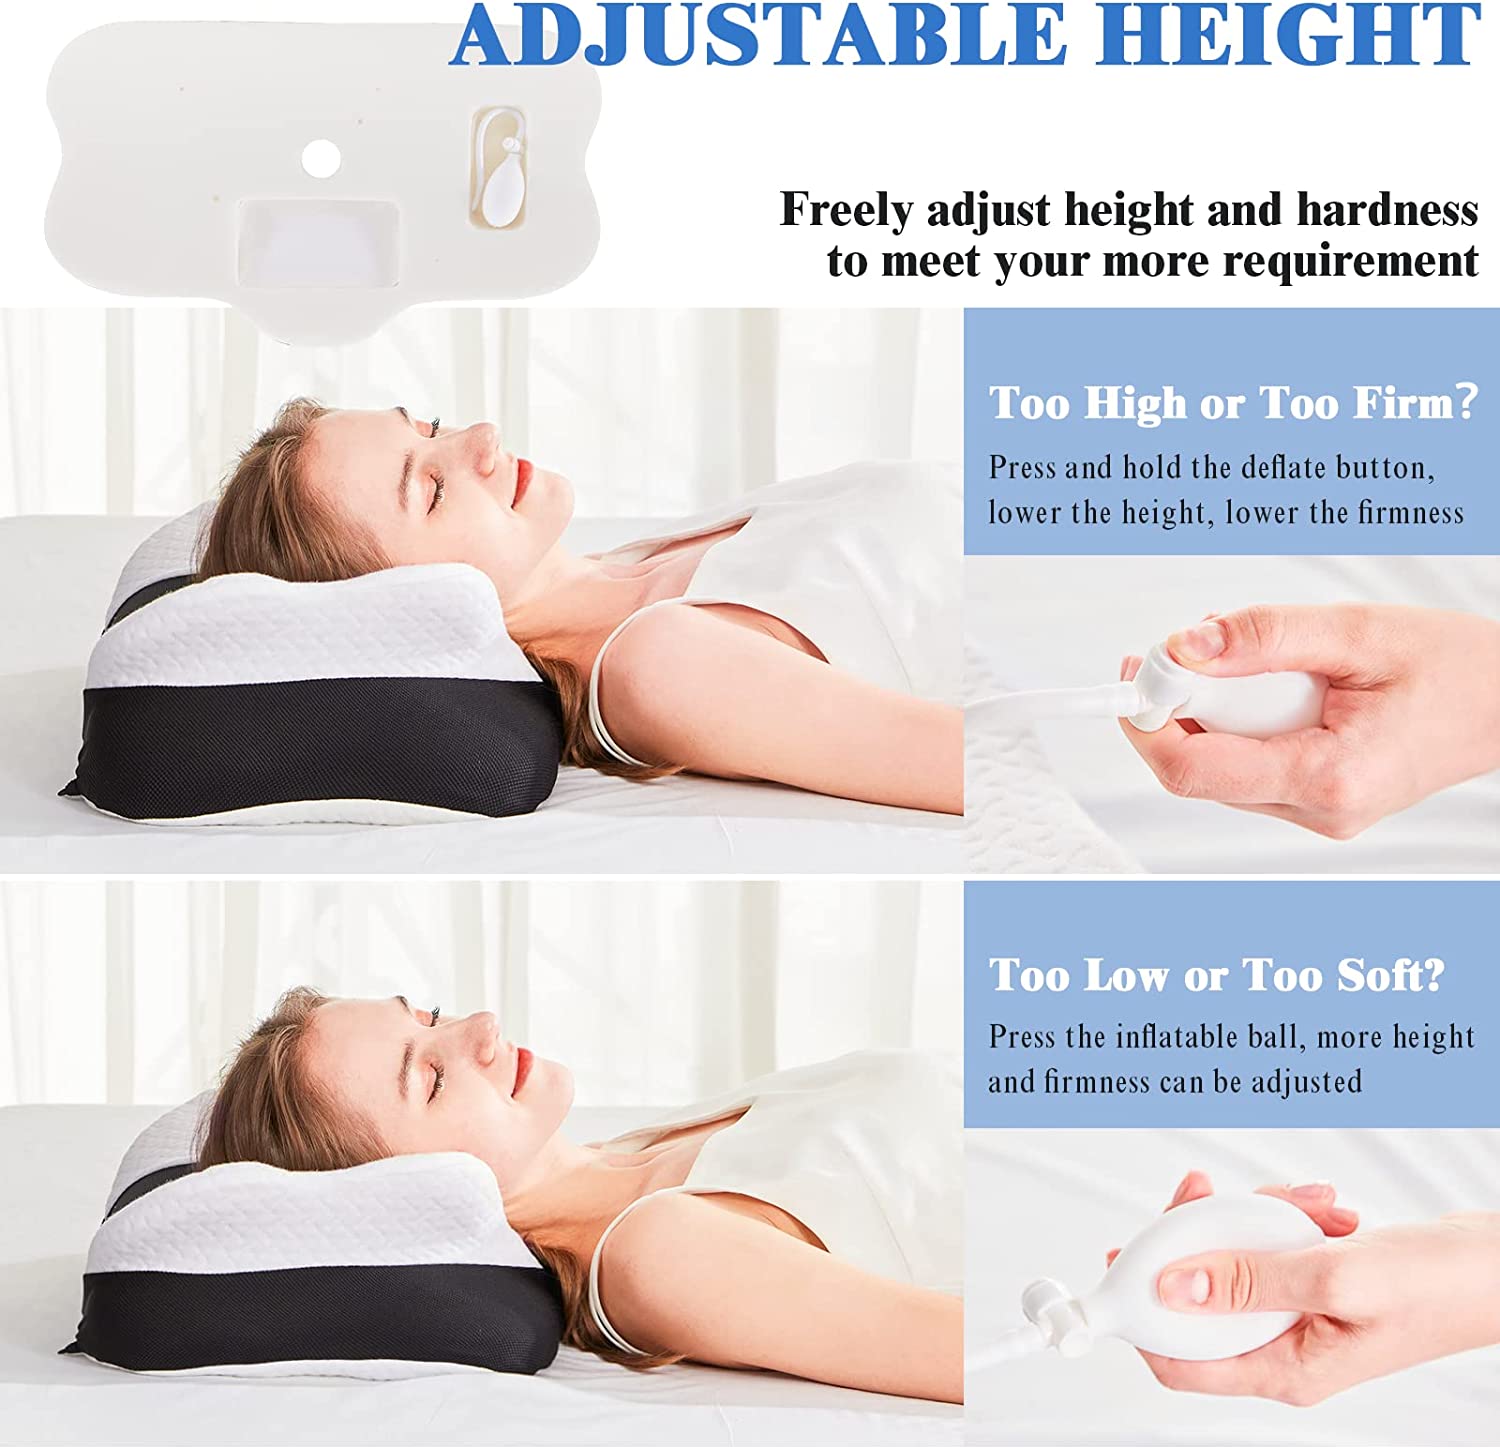 Cervical Memory Foam Pillows, Side Sleeper Pillow for Neck Shoulder Pain Relive Orthopedic Contour Ergonomic Inflatable Height Adjustable Pillows with Air Bag for Back Stomach Sleepers